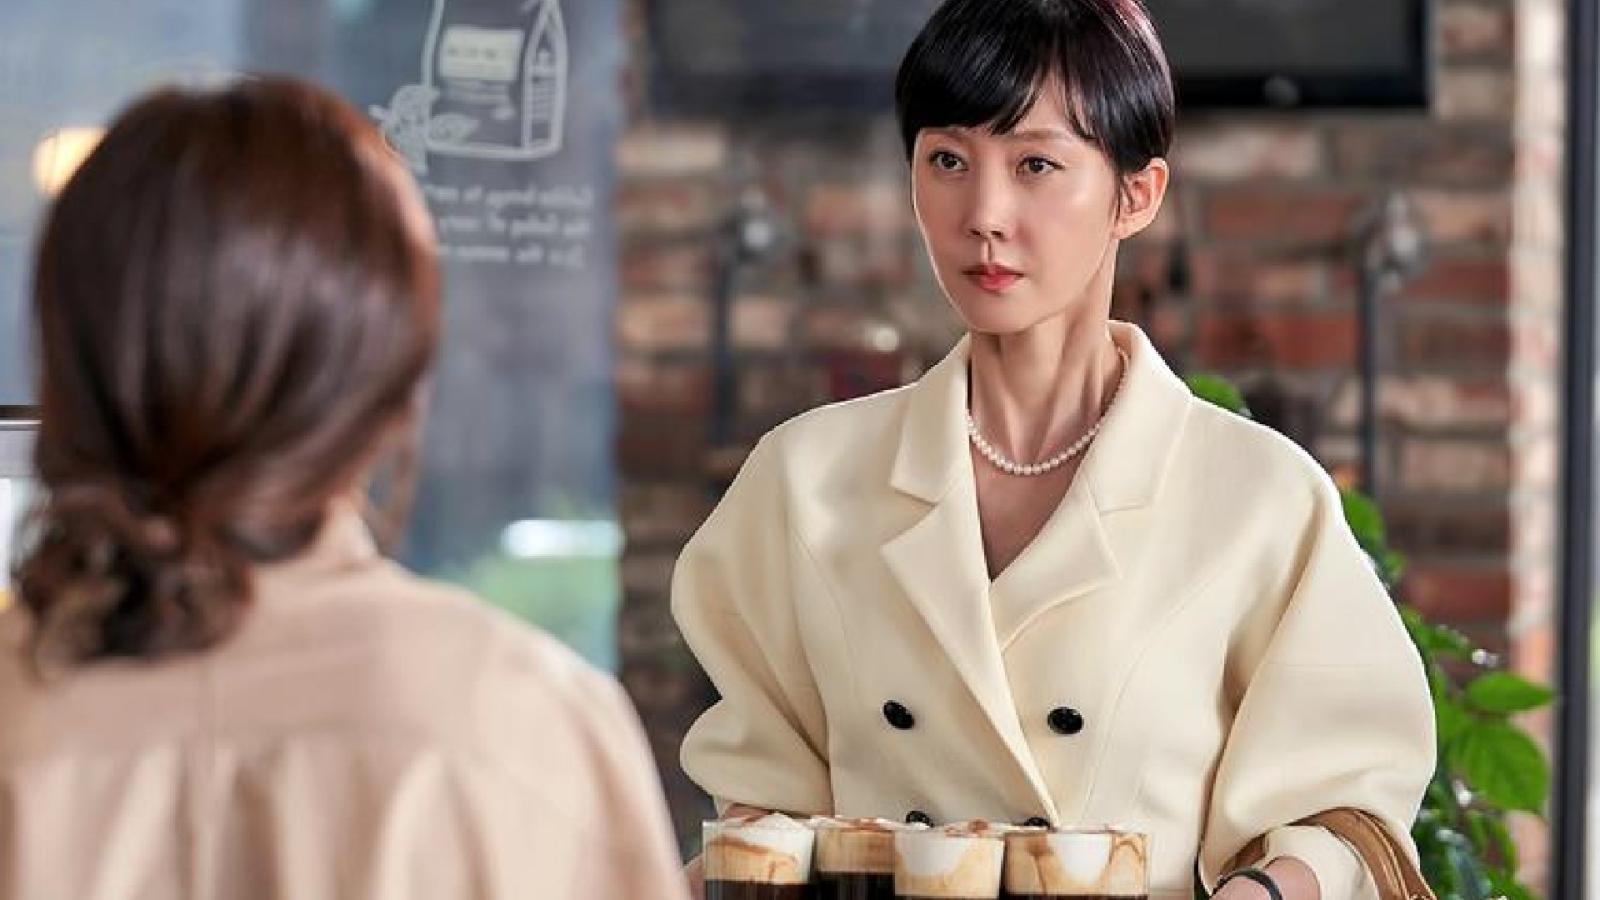 Which K-Drama Parent Are You Based on Your Parenting Style? - image 1